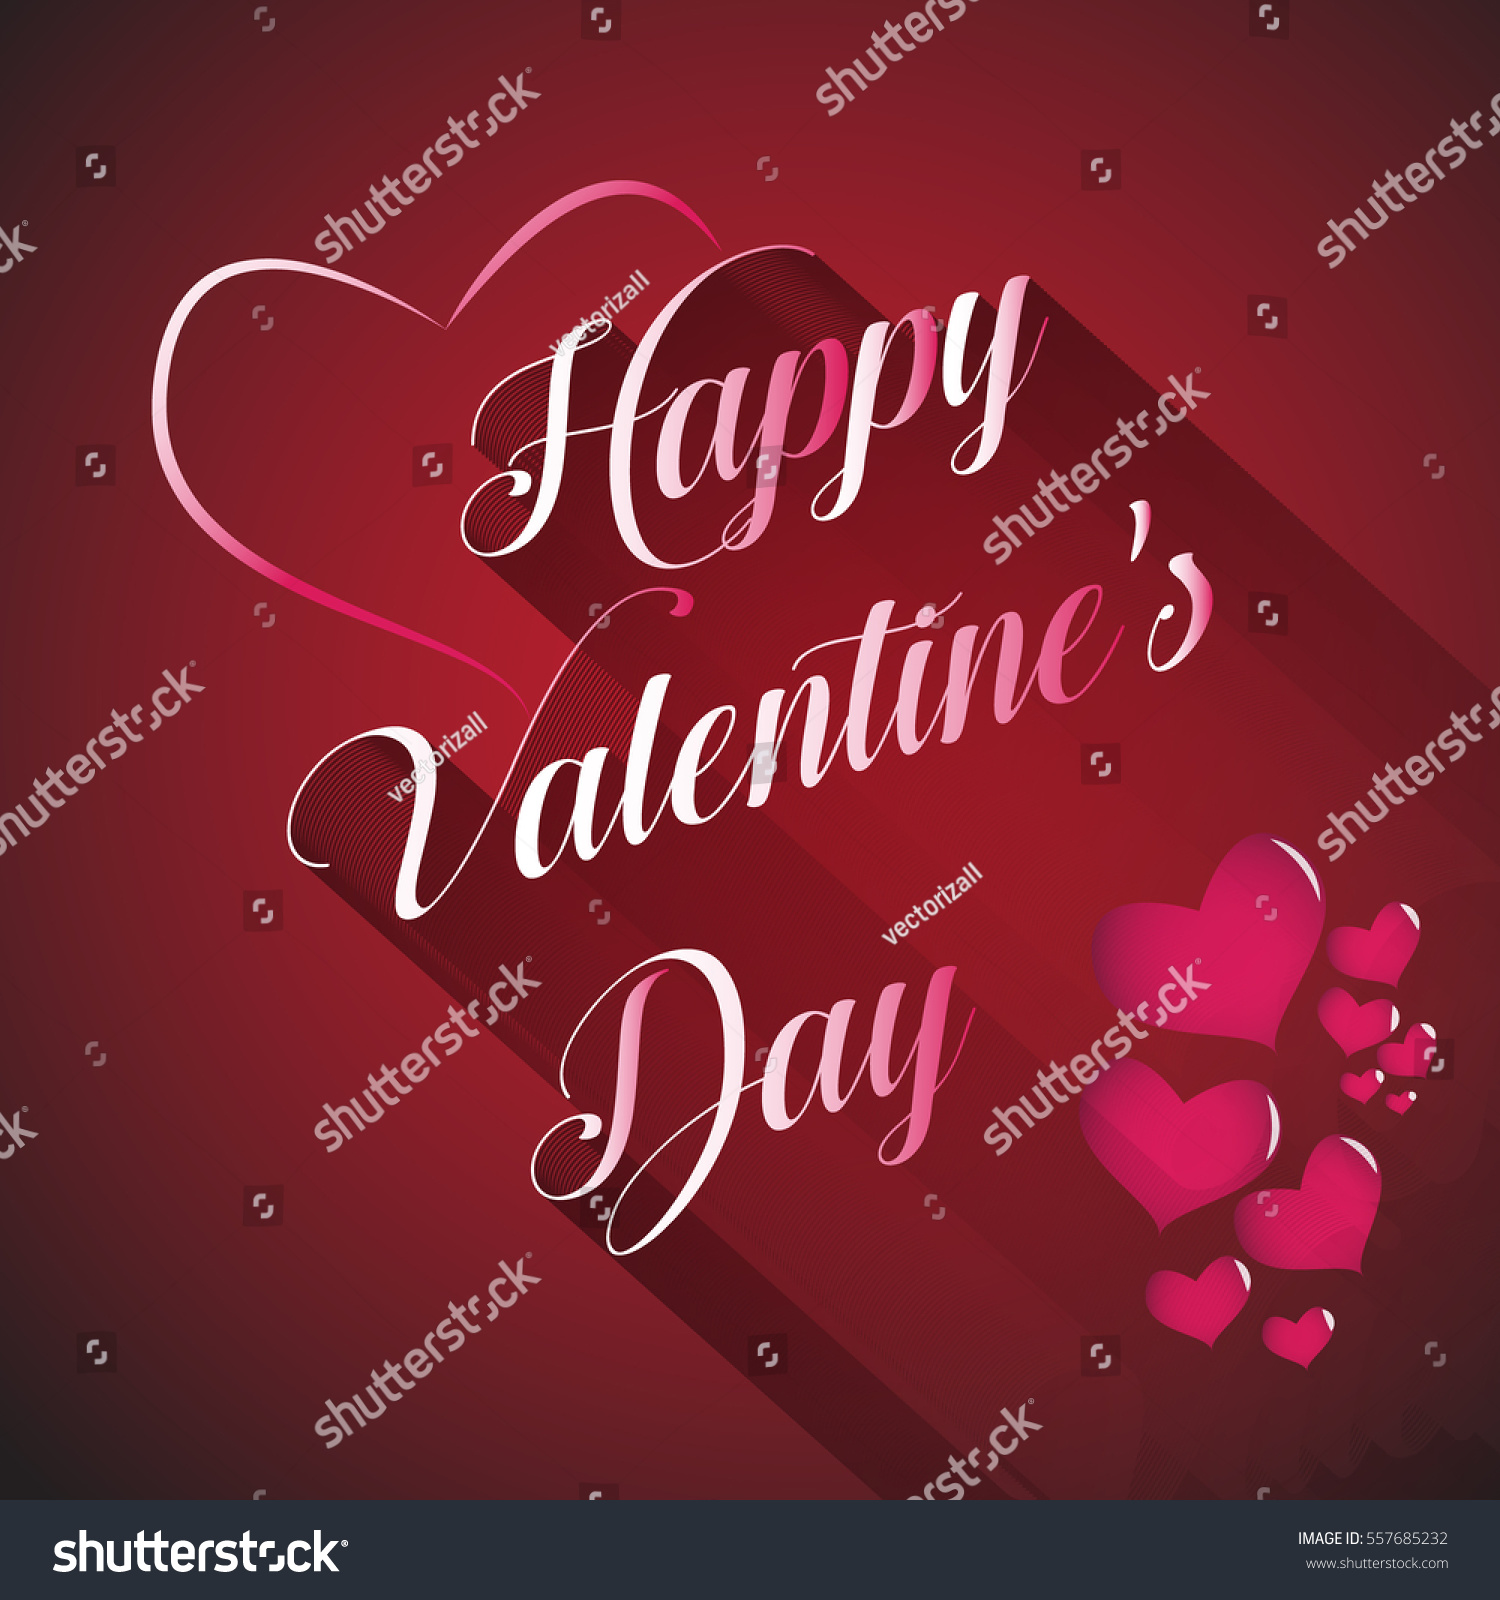 happy valentine's day with long sadow #557685232